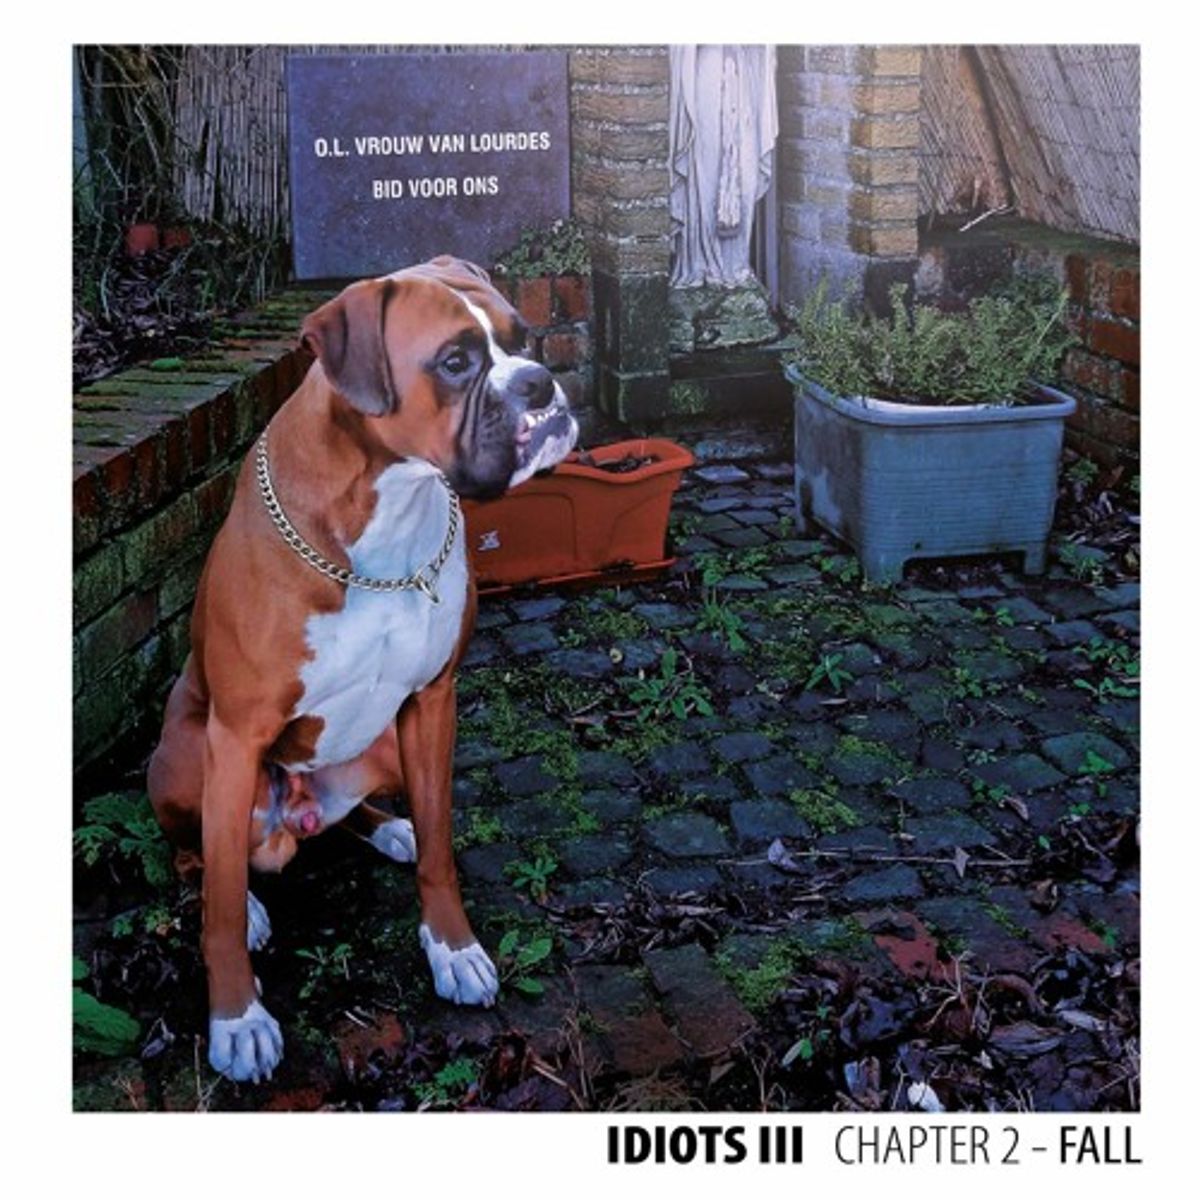 Idiots - 'Chapter 2 - Fall'